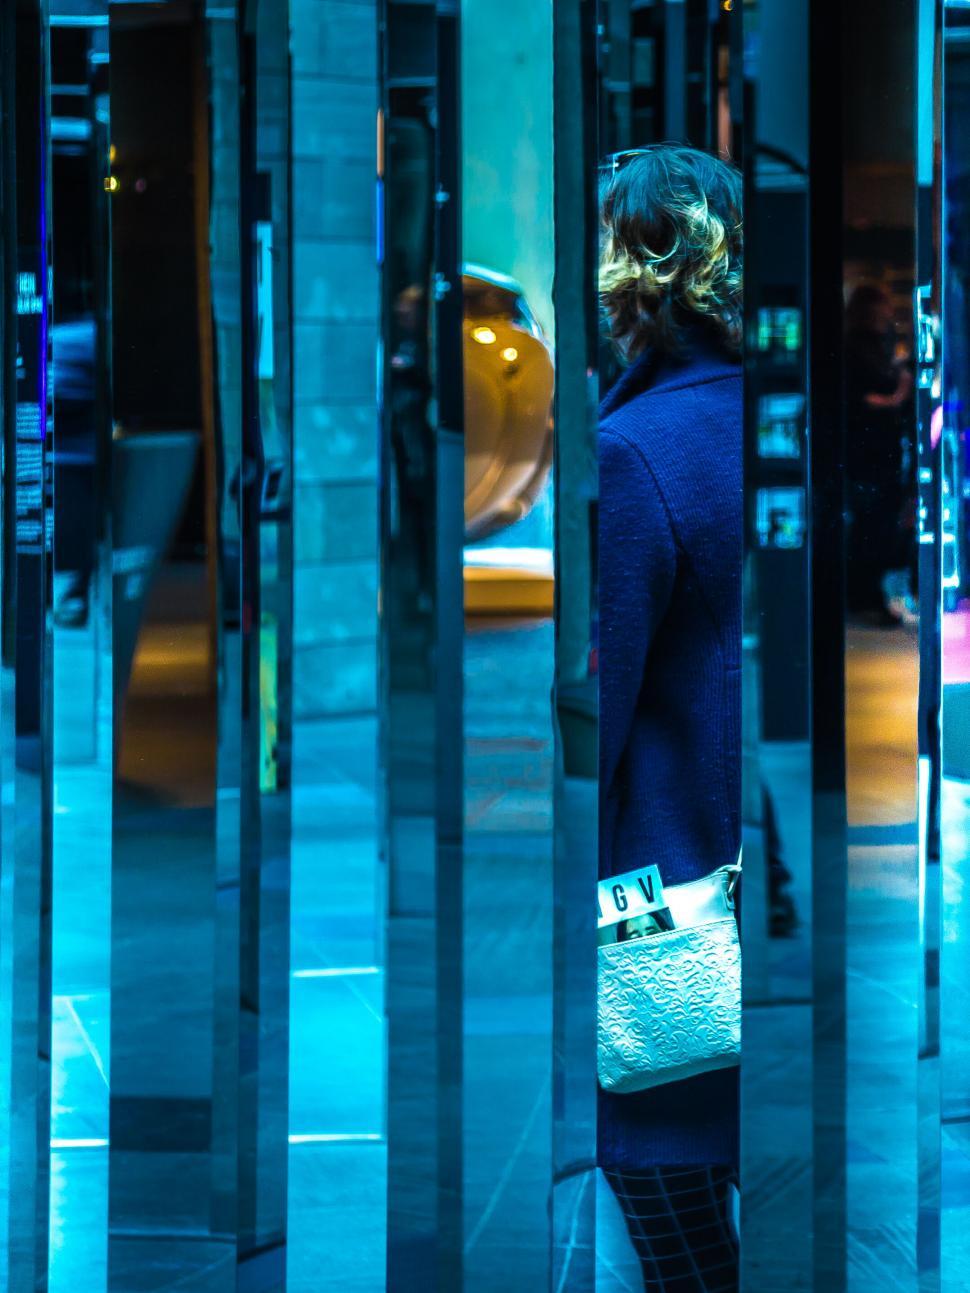 Free Image of Woman reflected in a vibrant blue glass 